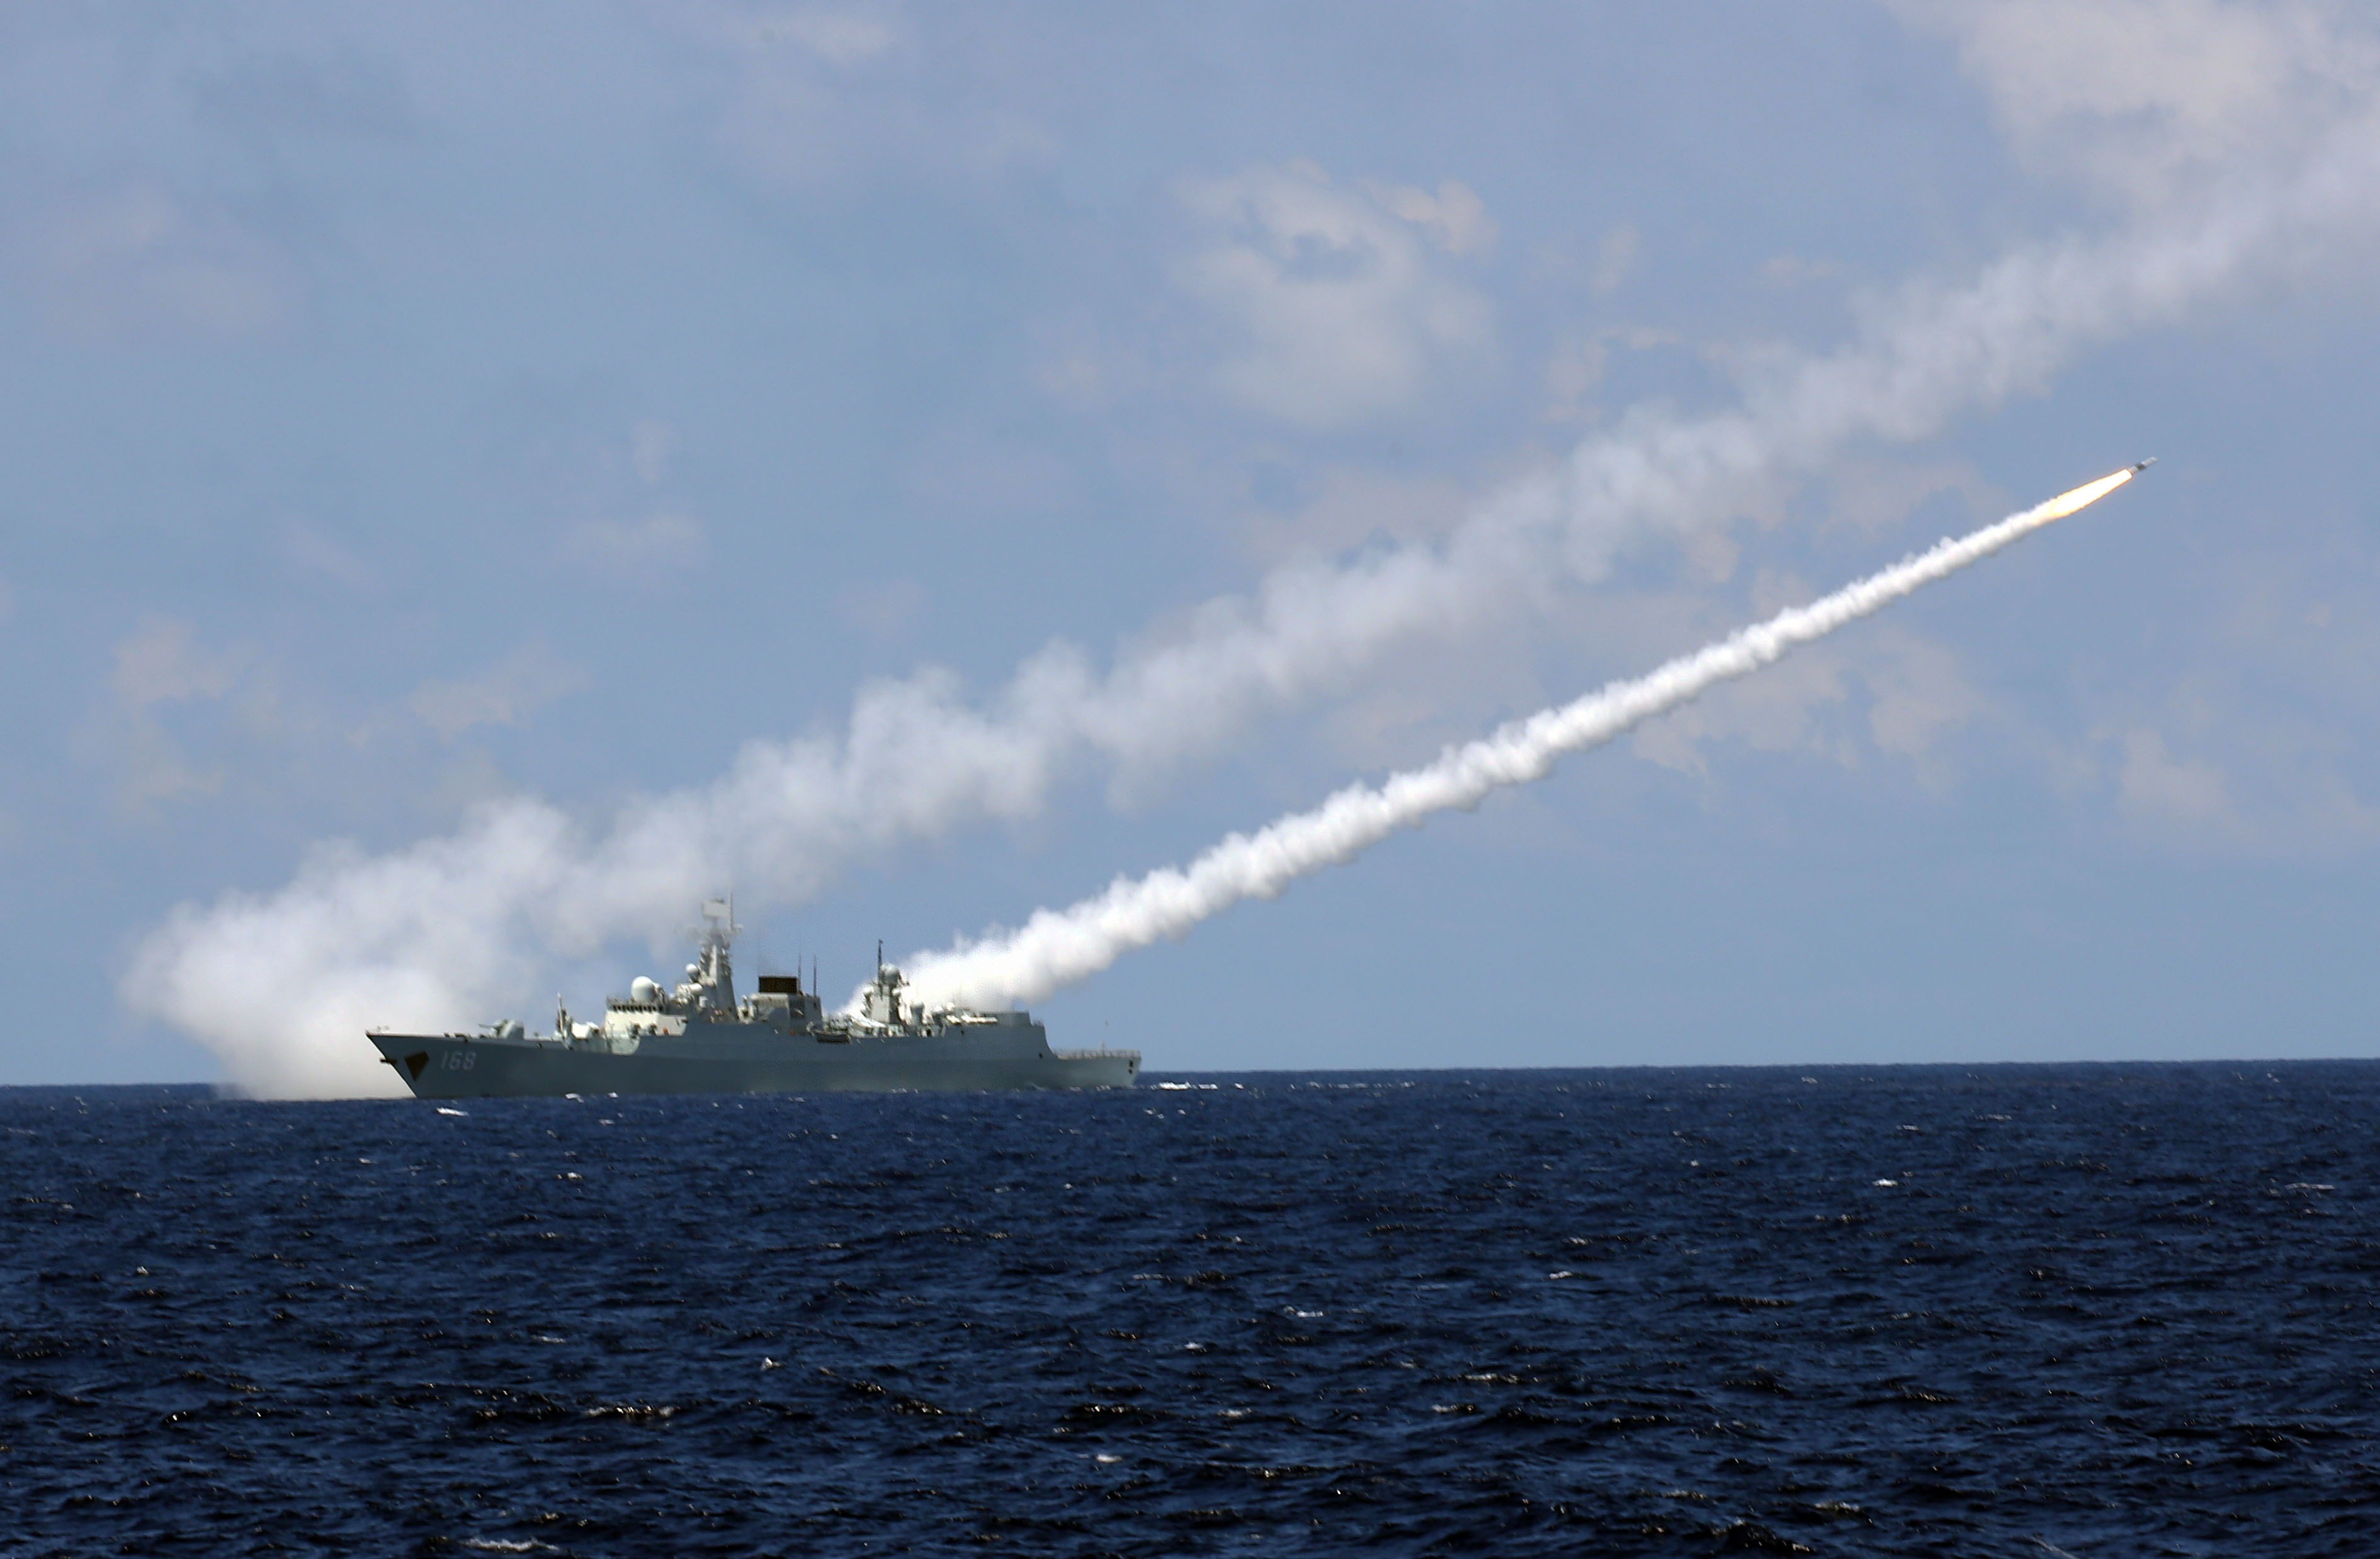 Missile destroyer Guangzhou launches an air-defense missile during a military exercise in the water area near south China's Hainan Island and Xisha islands on July 8, 2016 (Xinhua News Agency—Xinhua News Agency/Getty Images)